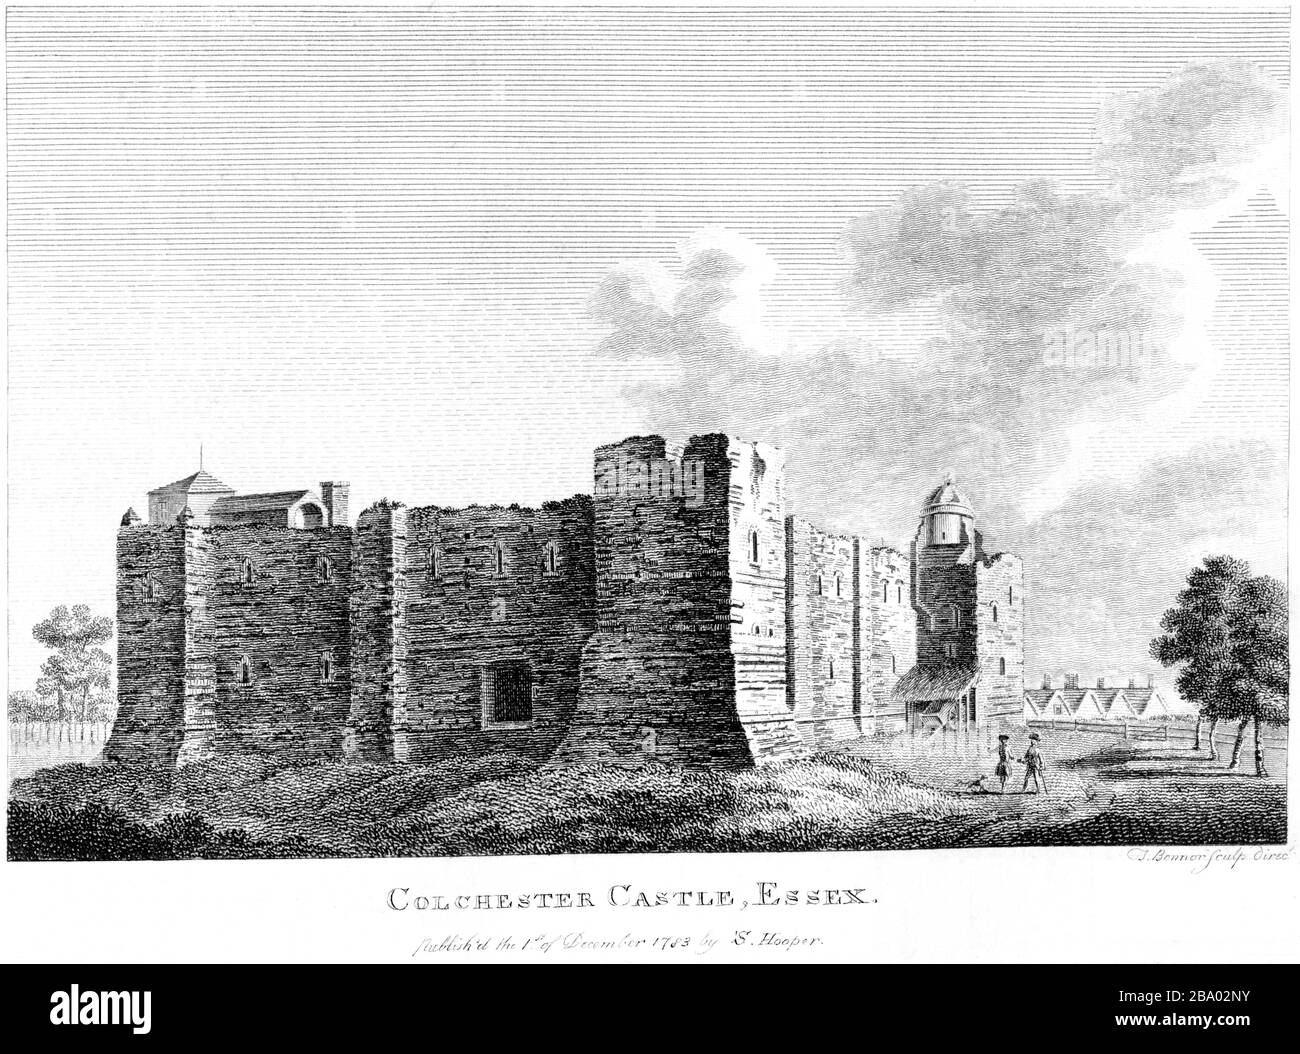 An engraving of Colchester Castle Essex 1783 scanned at high resolution from a book published around 1786. Believed copyright free. Stock Photo